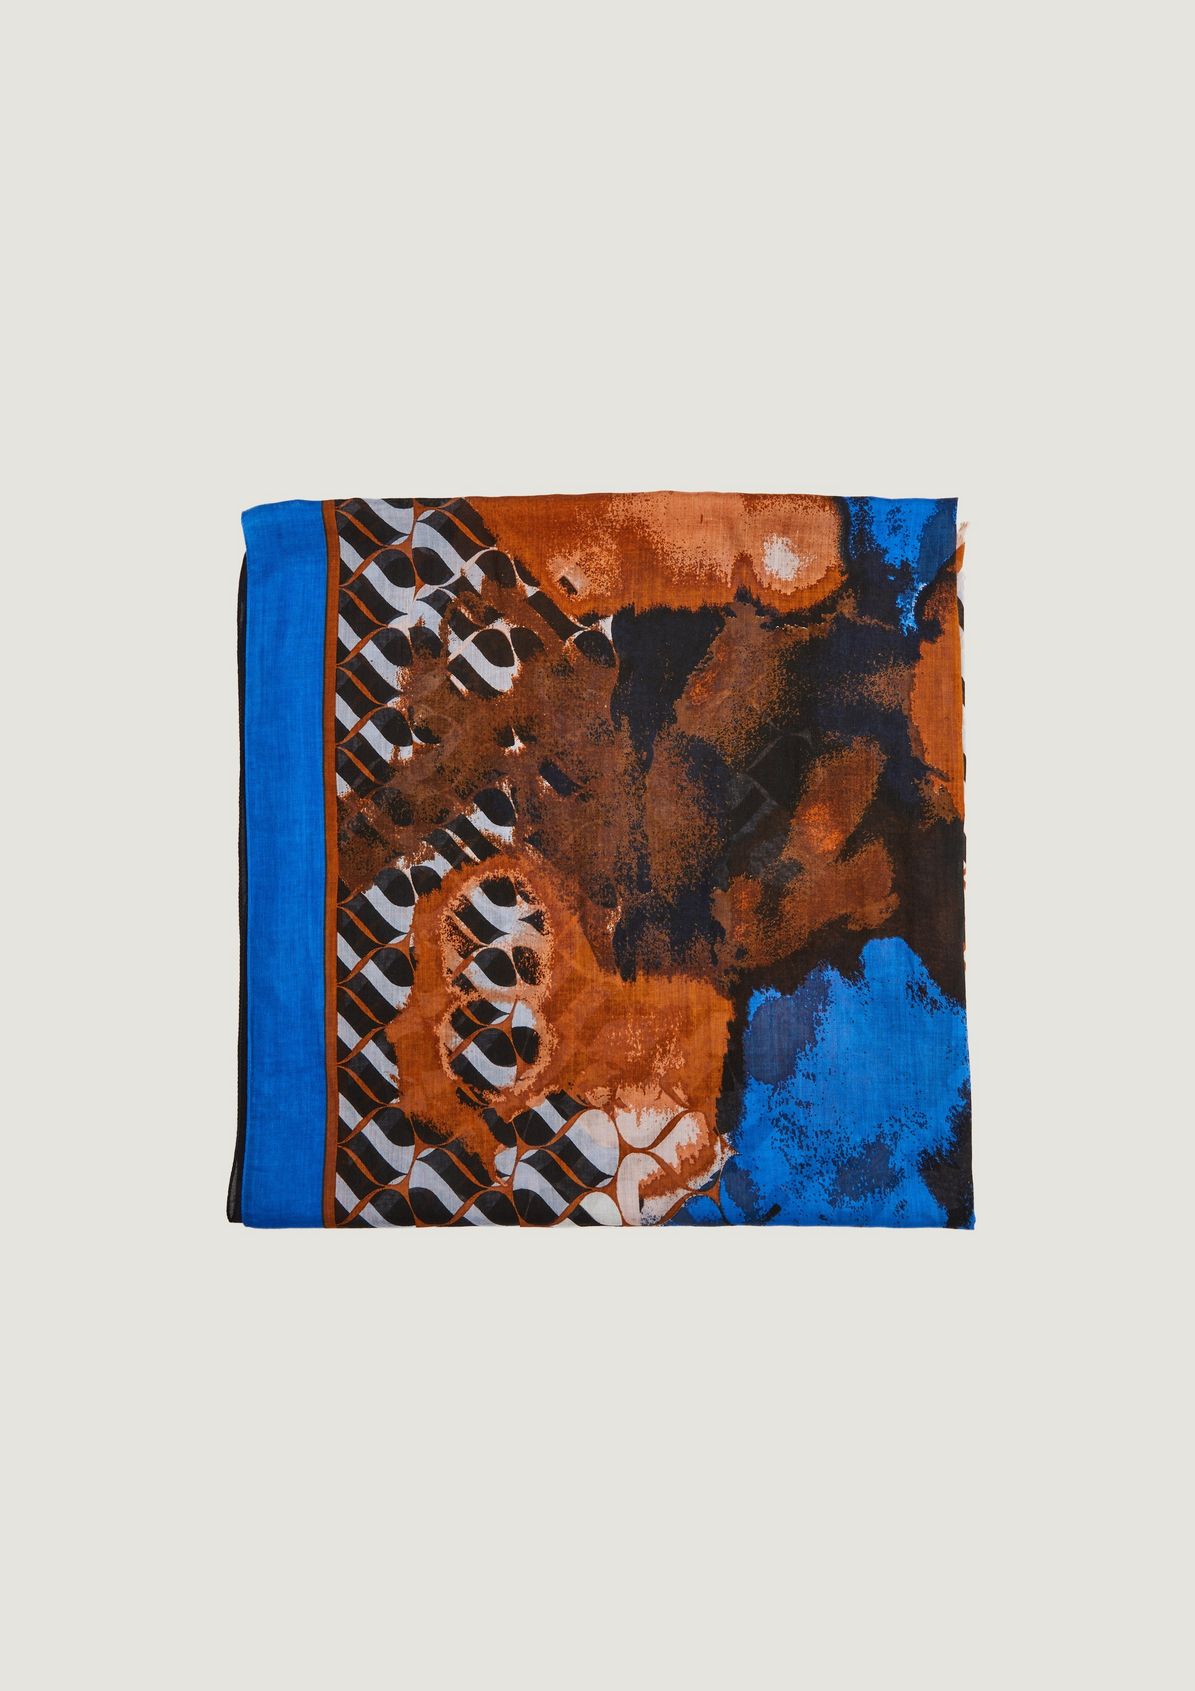 Scarf from comma